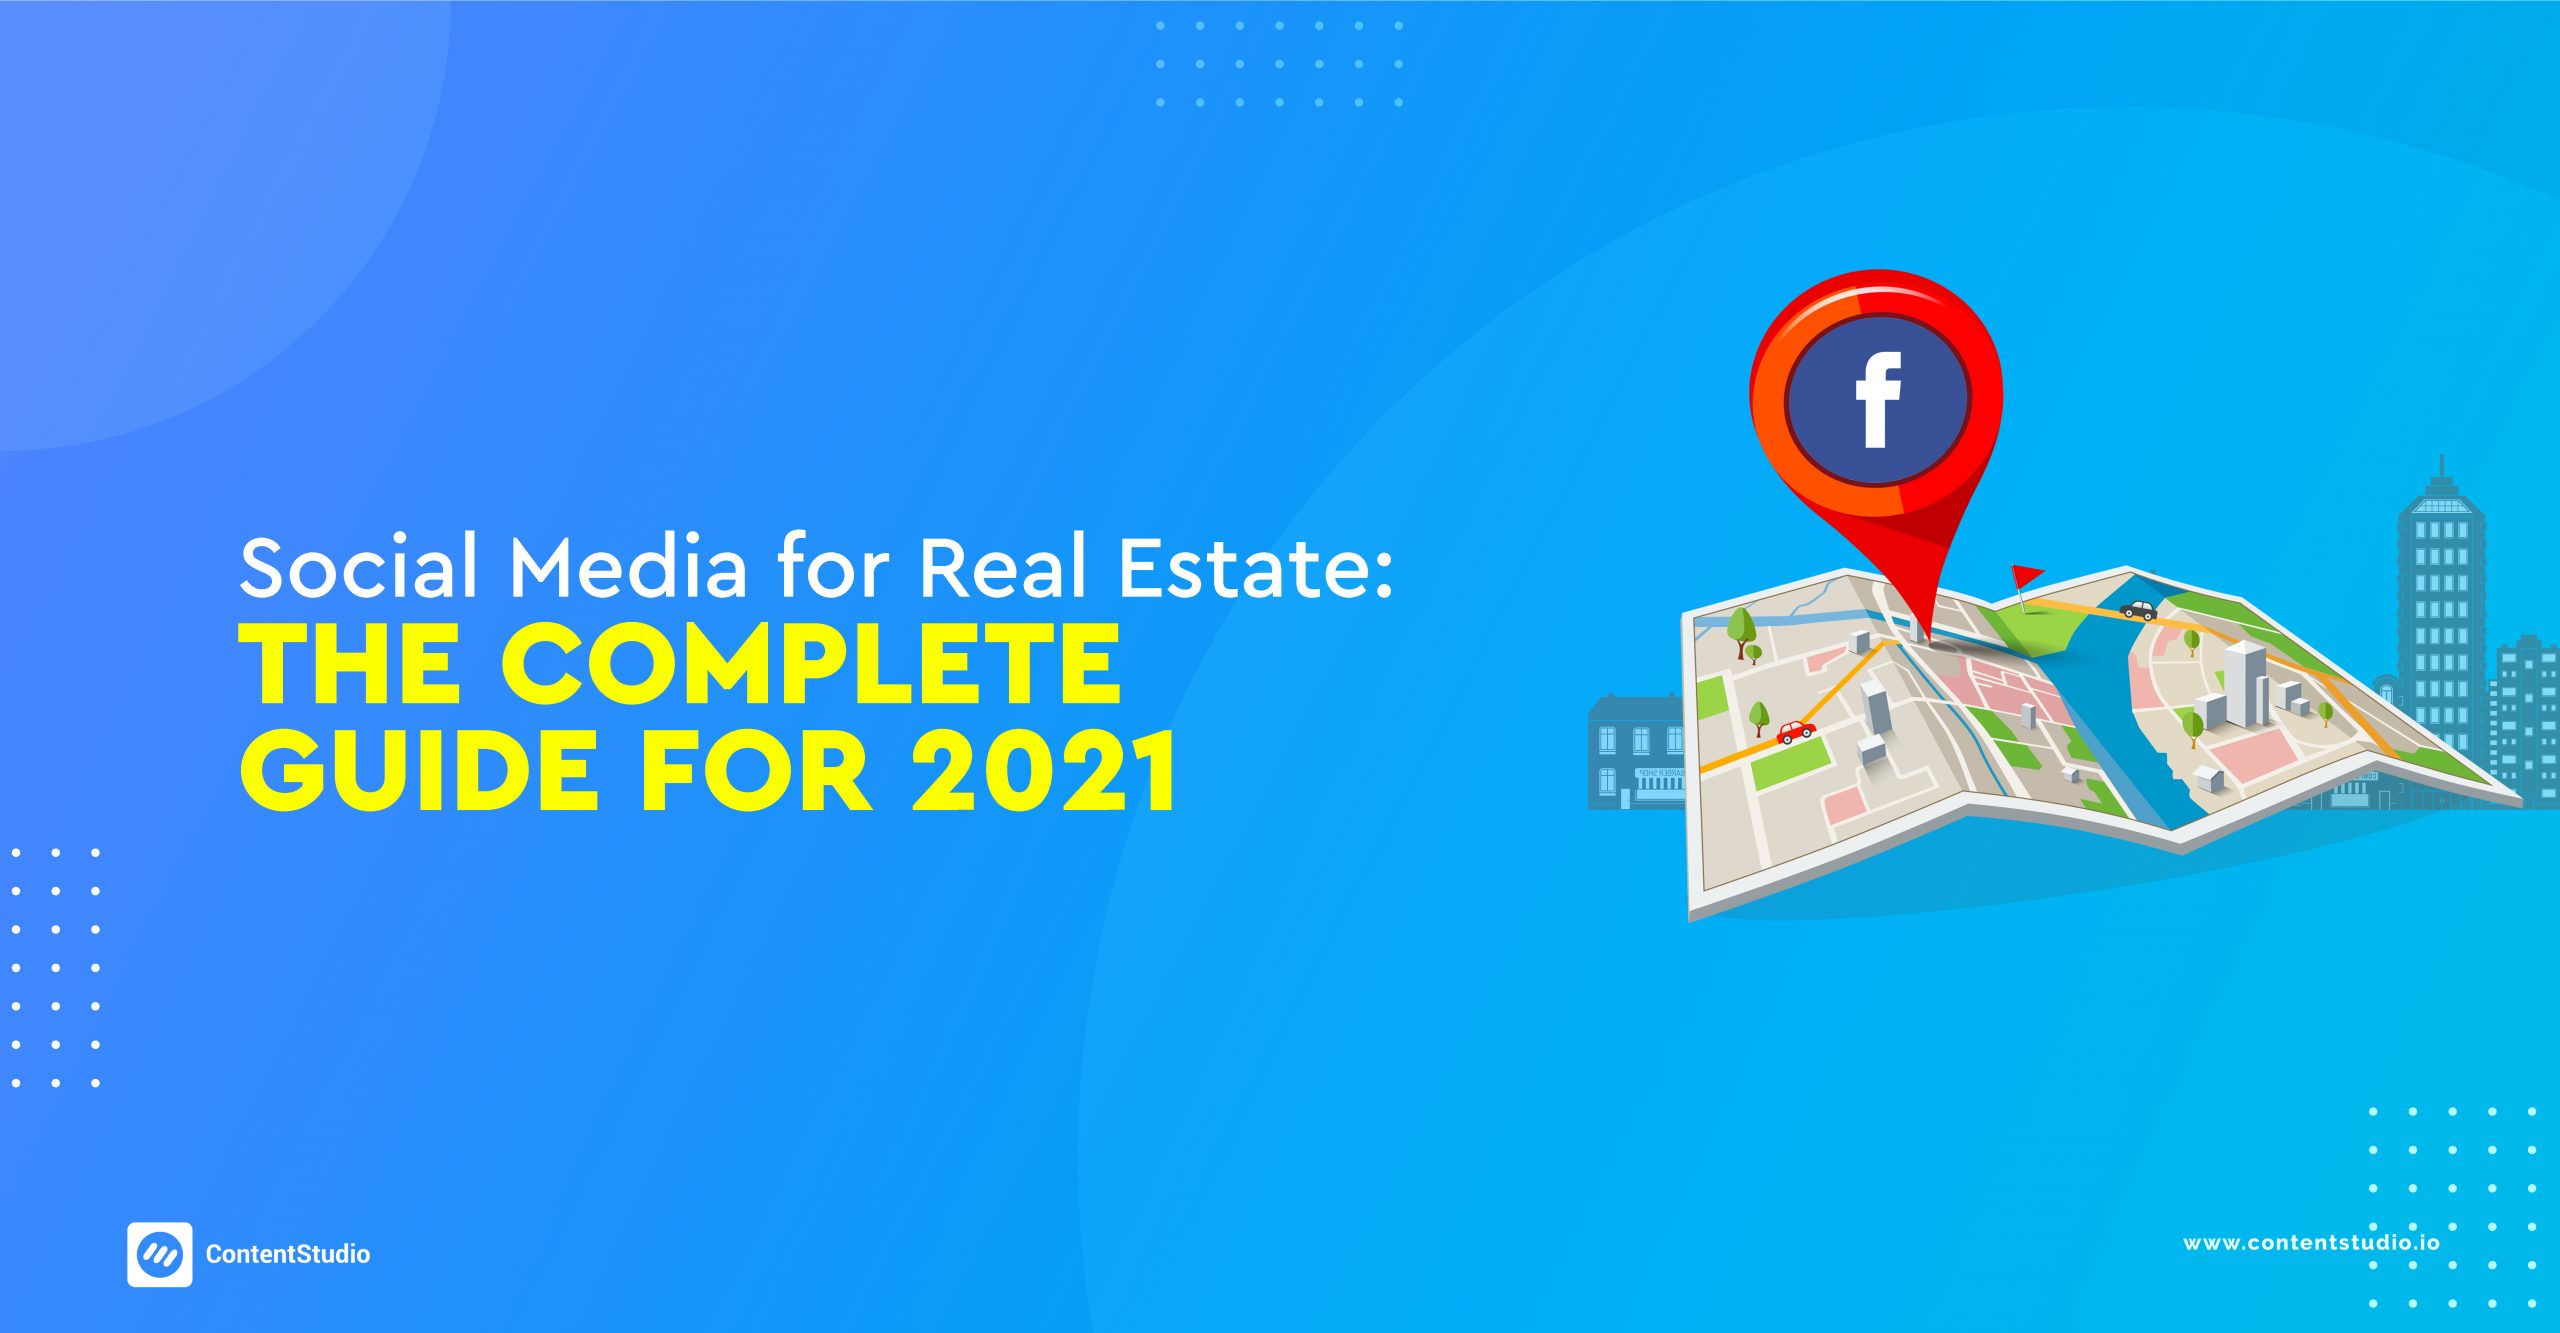 Social Media for Real Estate: The Complete Guide for 2021